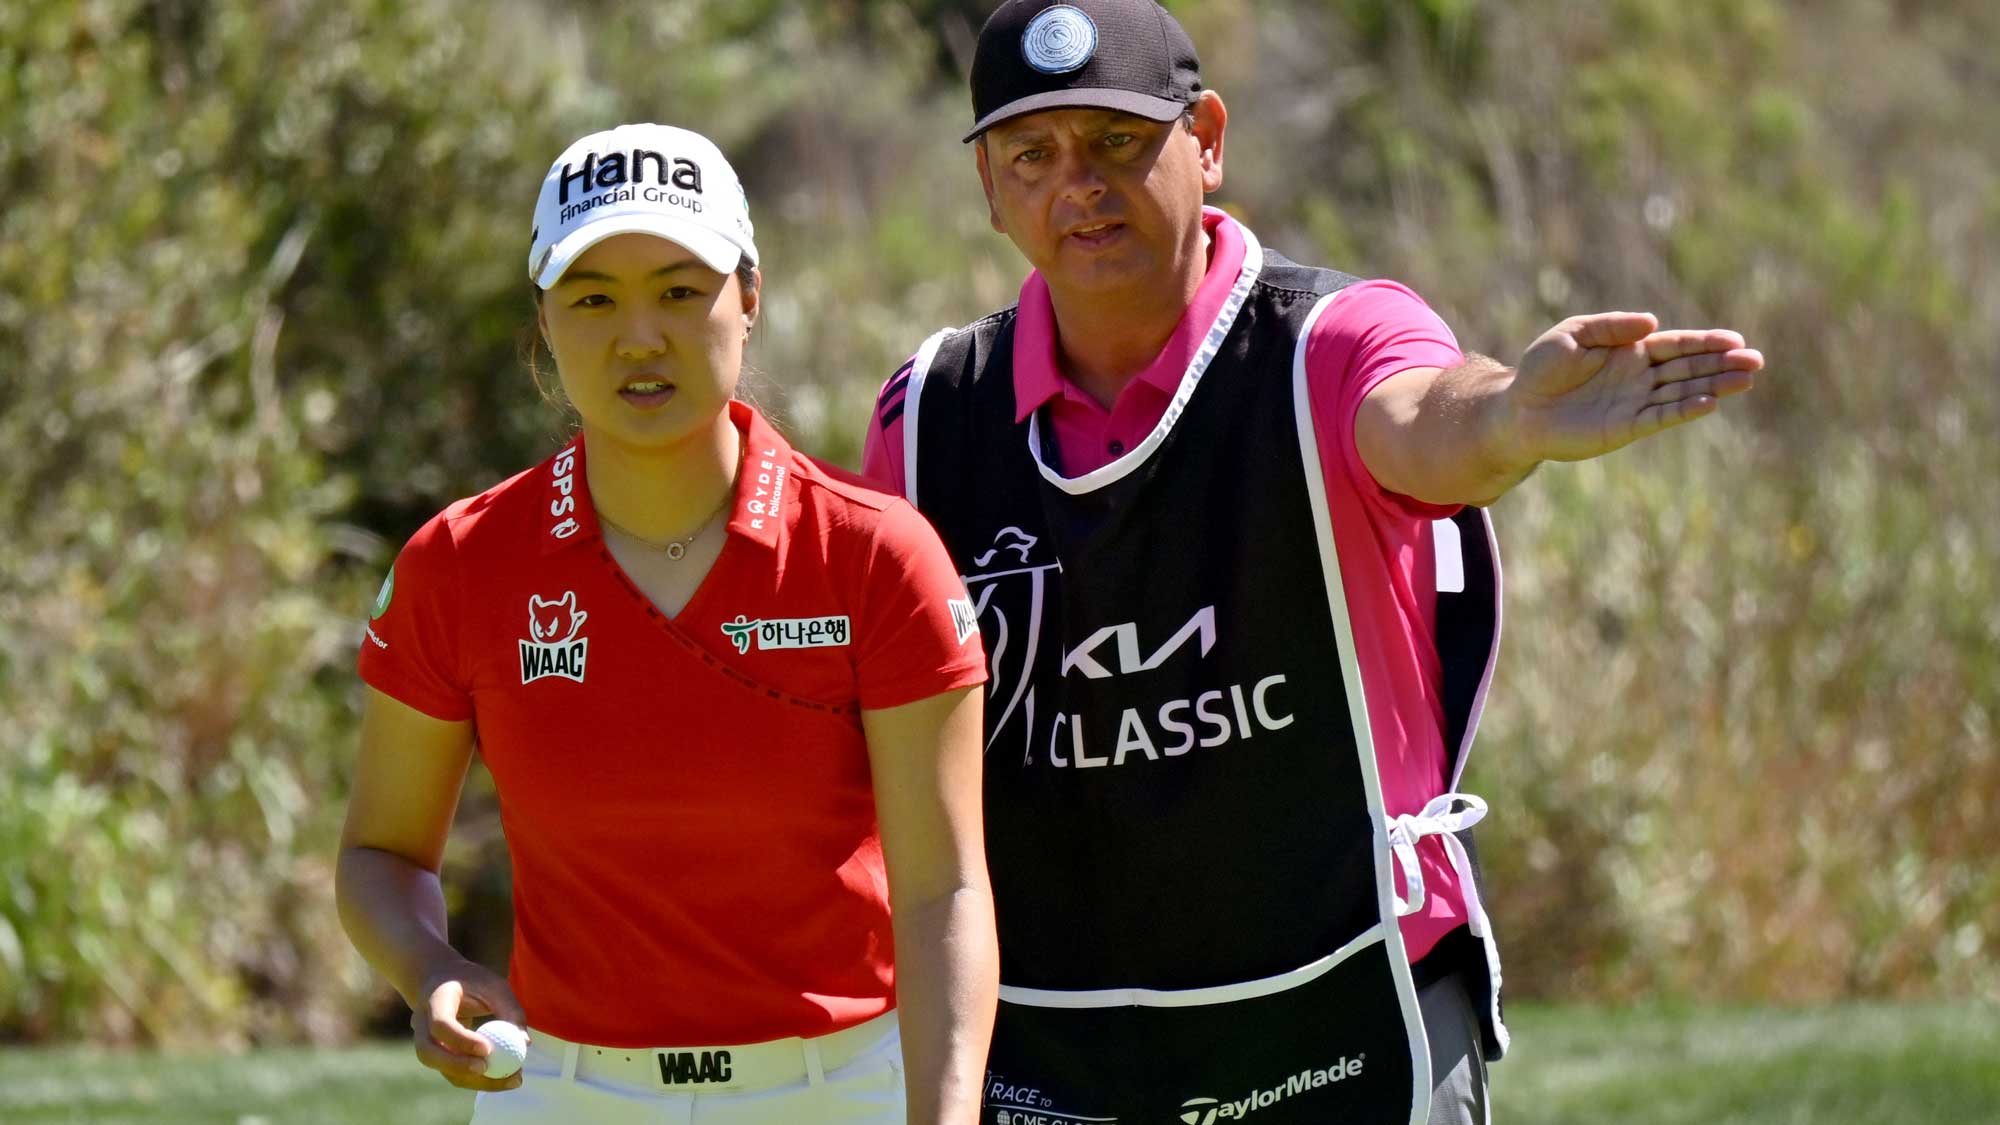 Minjee Lee of Australia lines up a putt with caddie on the 4th green during the Final Round of the KIA Classic at the Aviara Golf Club on March 28, 2021 in Carlsbad, California